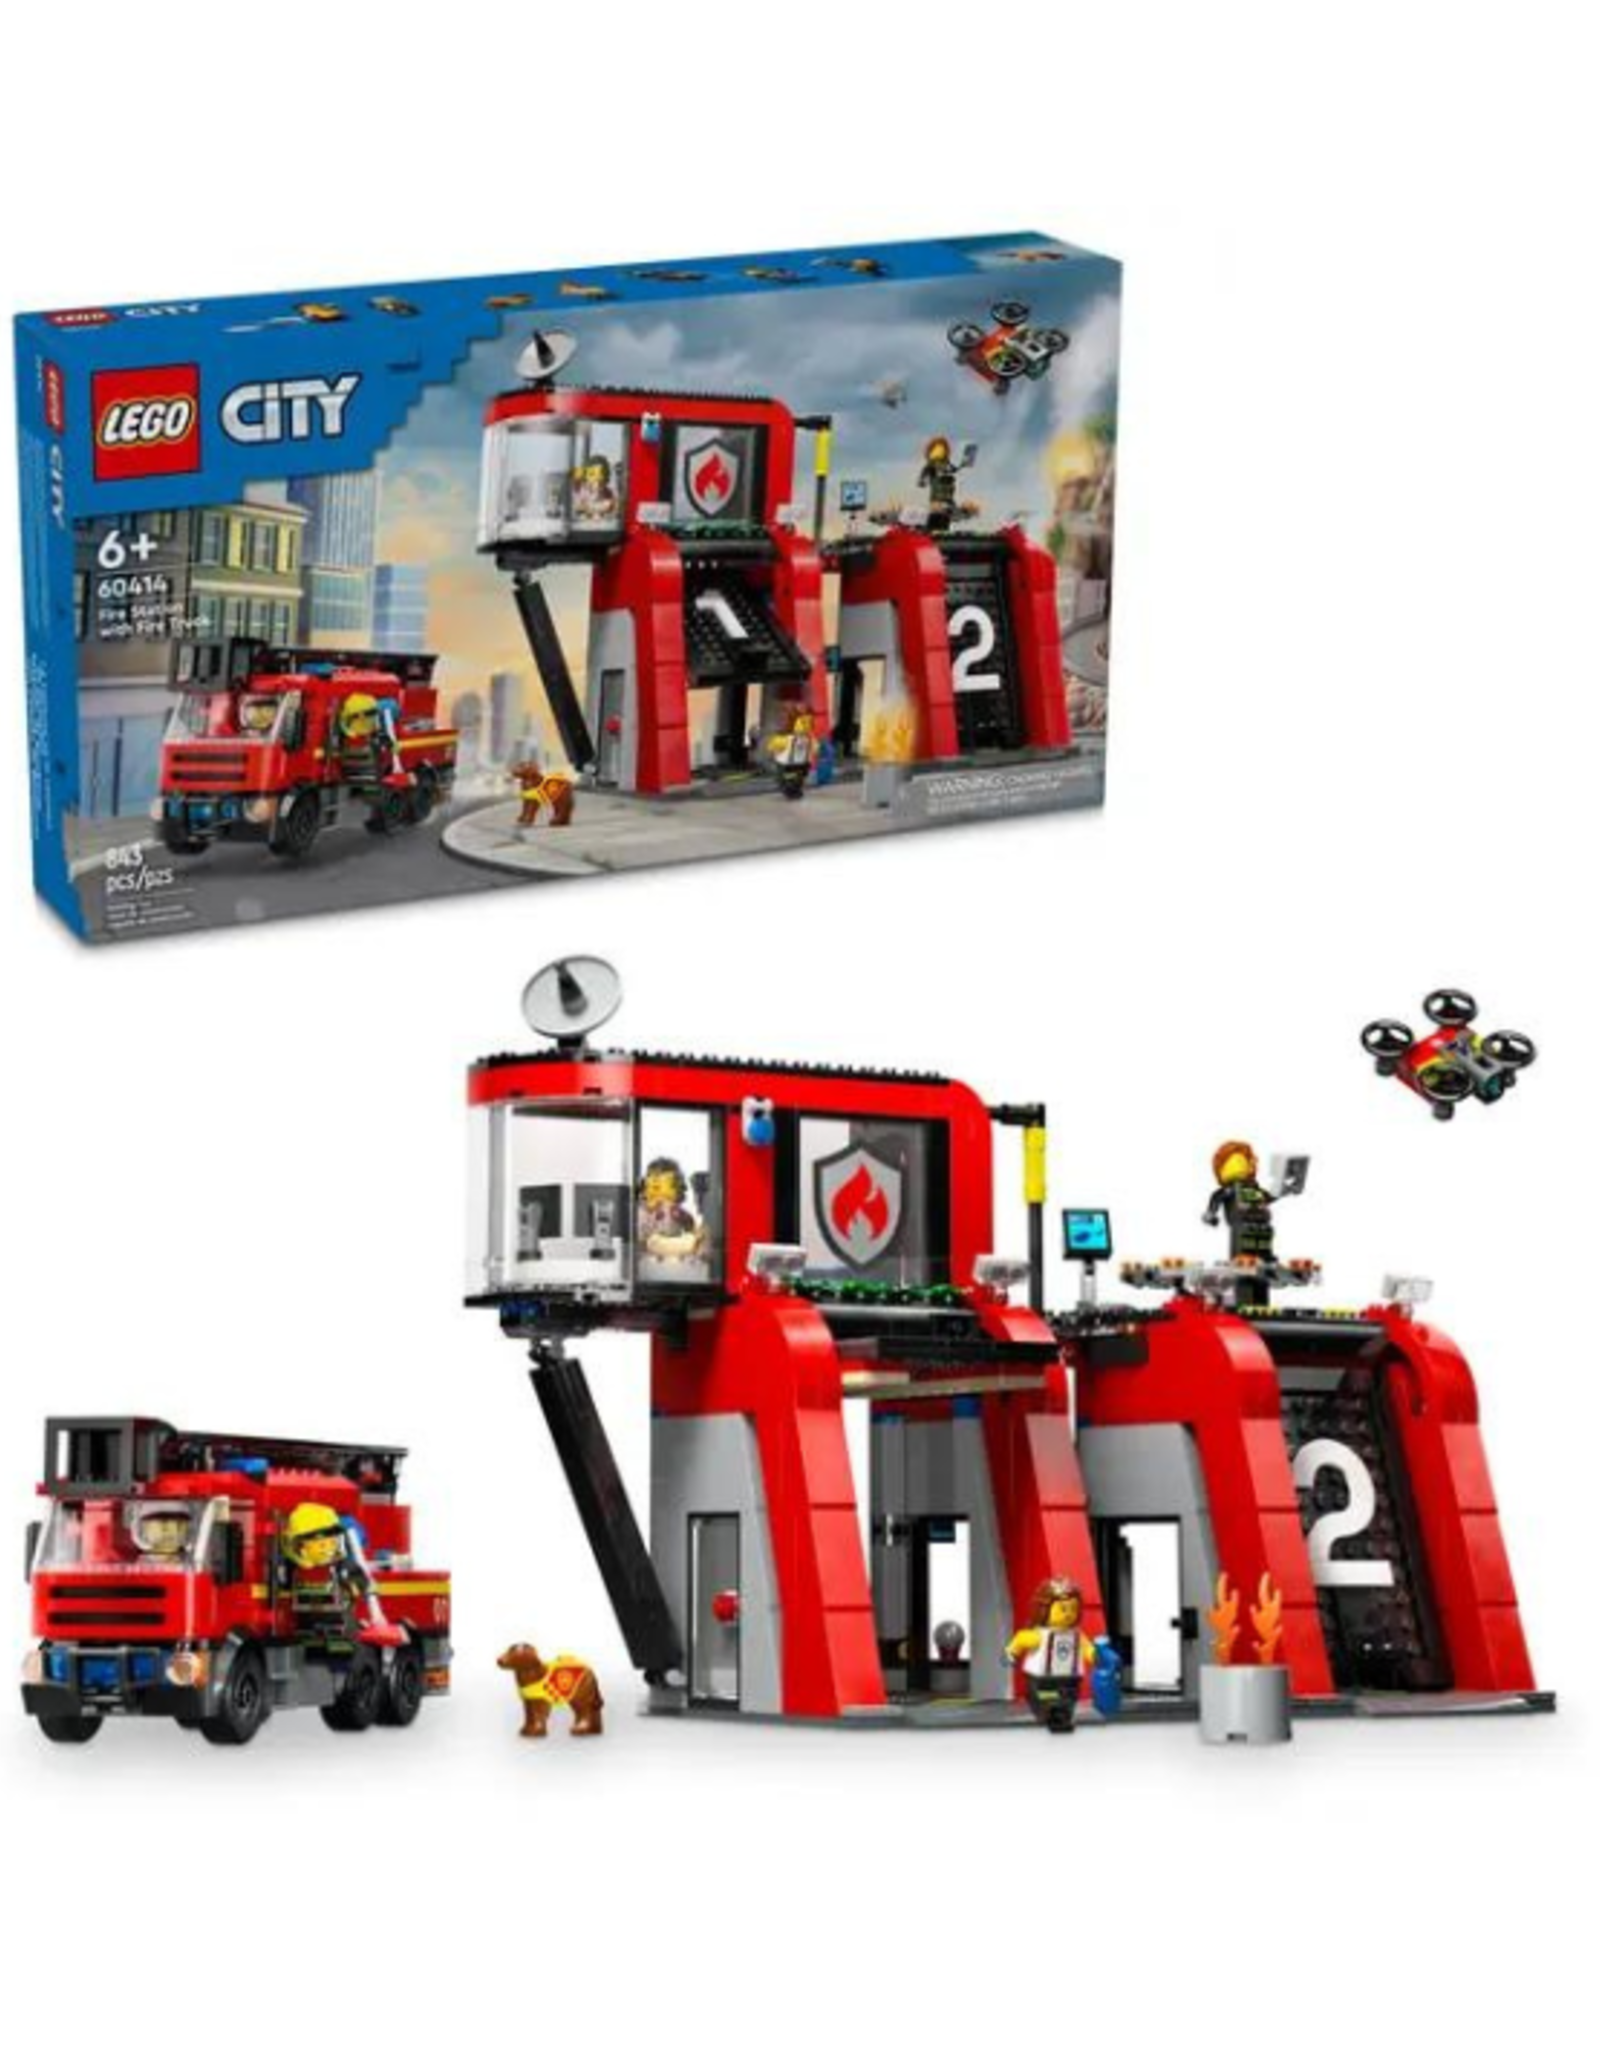 Lego Lego - City - 60414 - Fire Station with Fire Truck